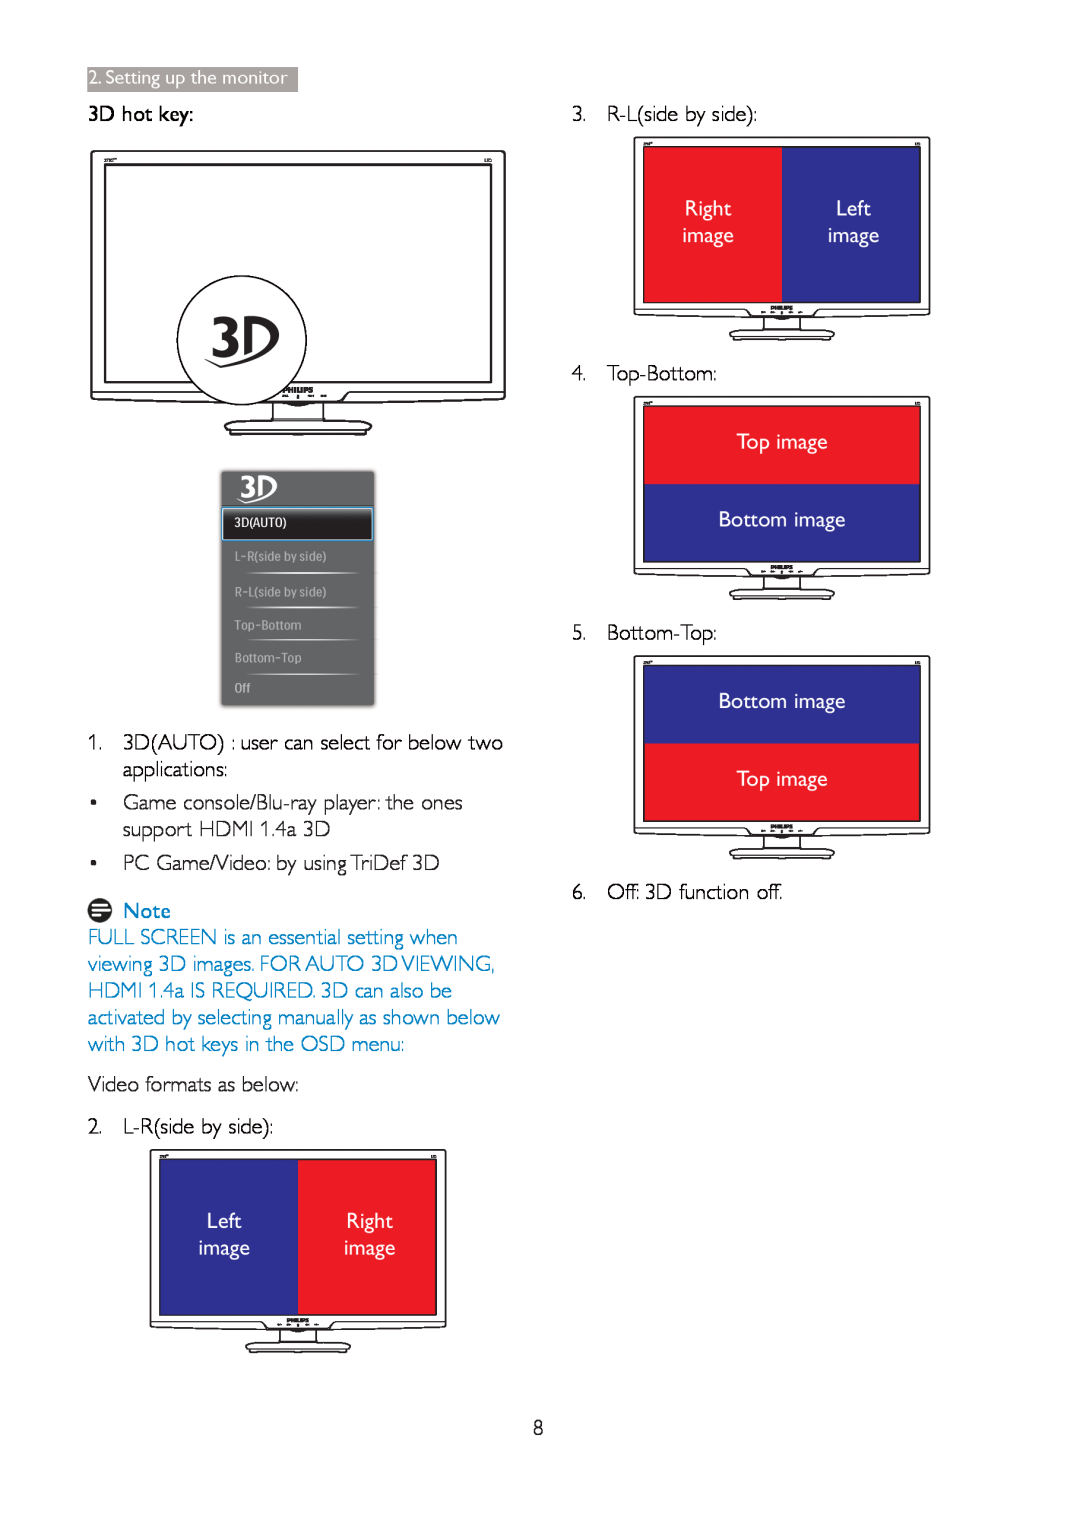 Philips 273G3D 3D hot key, 1. 3DAUTO user can select for below two applications, L-Rside by side, Left Right image image 